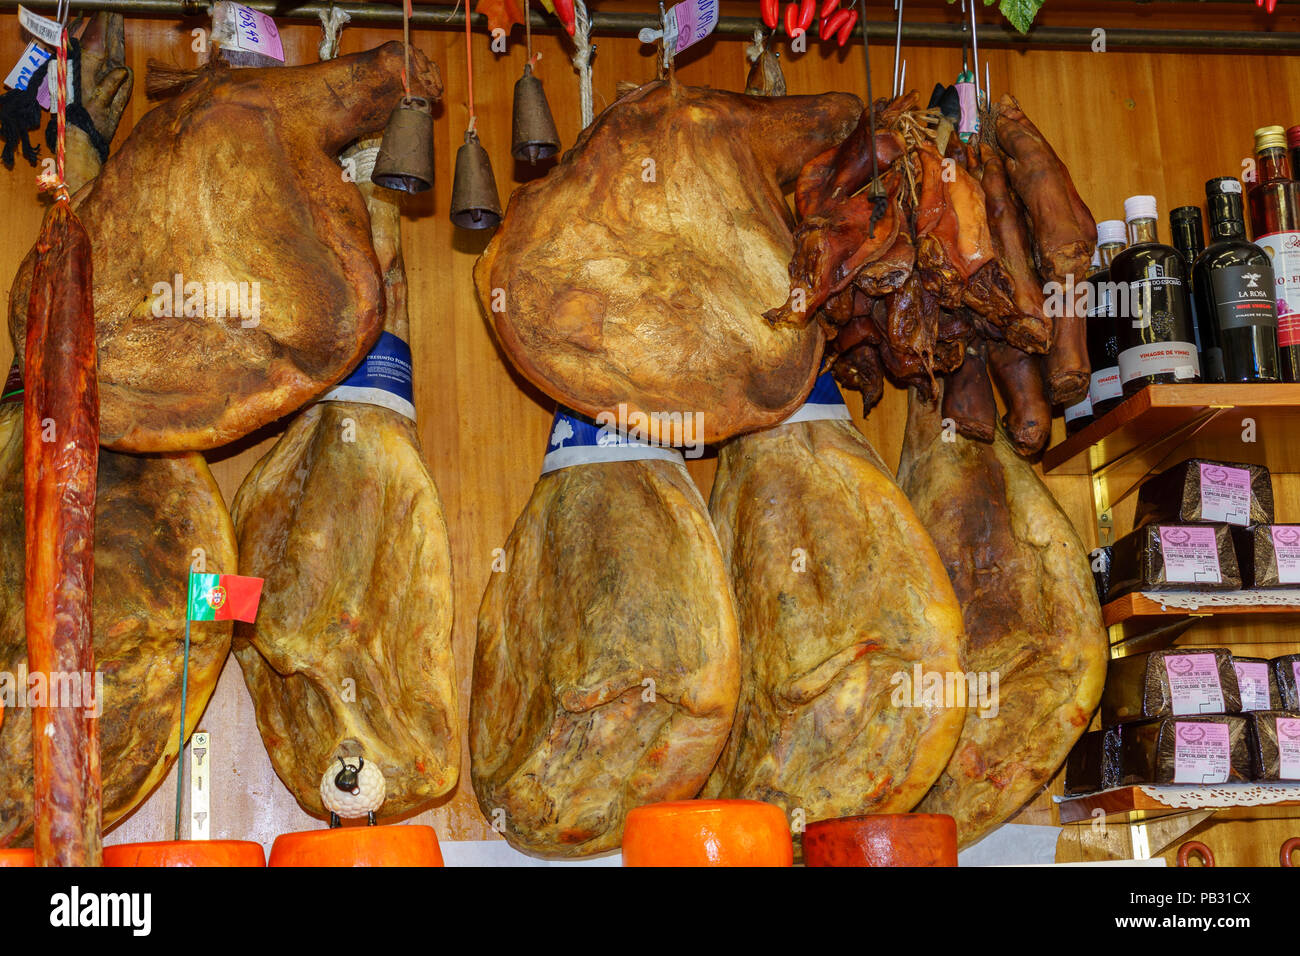 Iberian Ham hanging from hooks in a traditional delicatessan in Portugal. A row of round cheeses are arranged in the front. Stock Photo